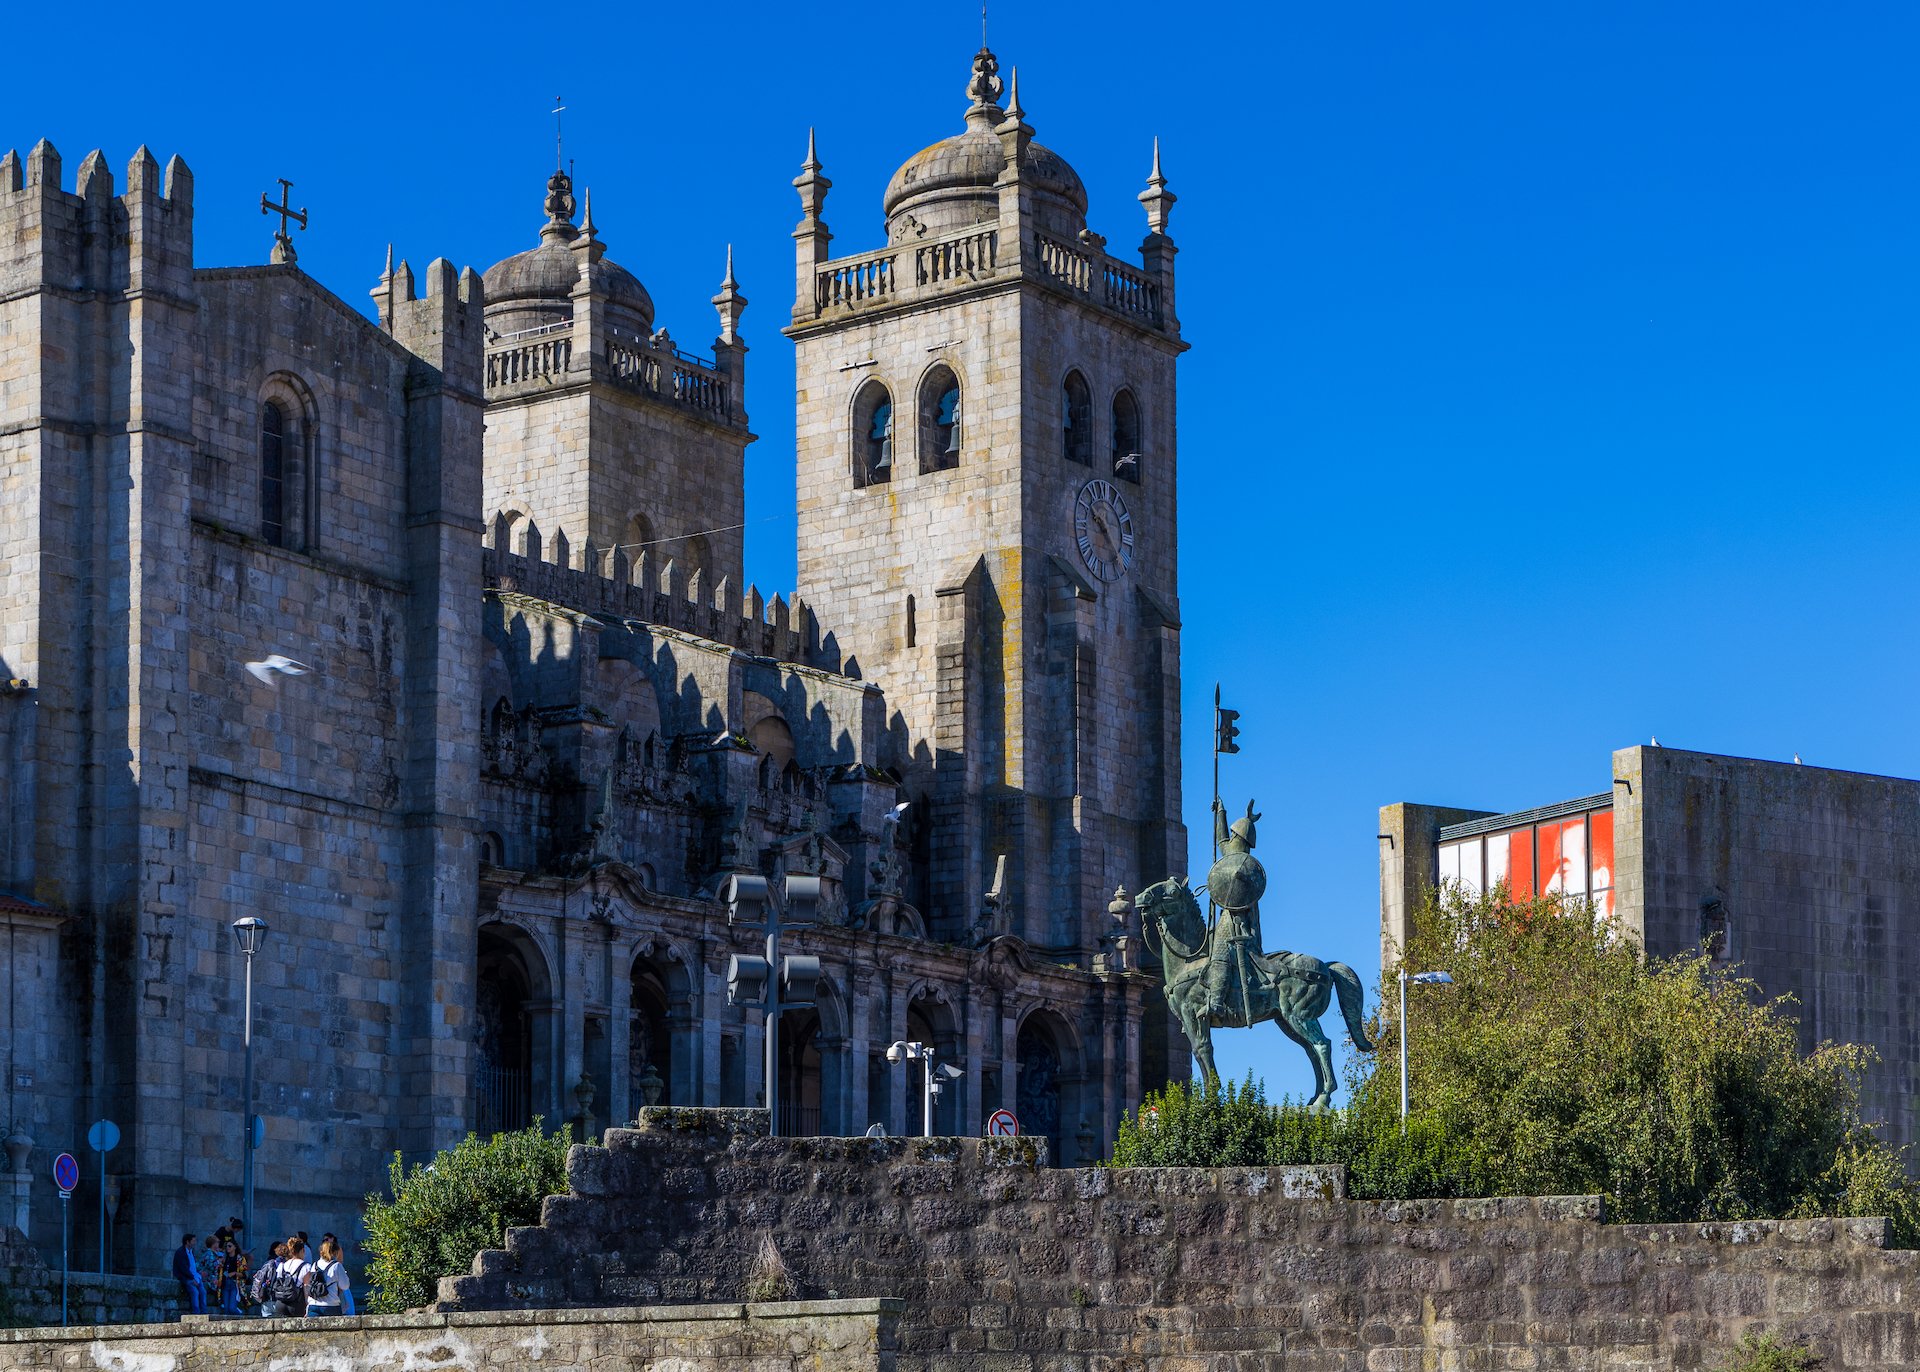  The Porto Cathedral is a Roman Catholic church located in the historical centre of the city. It is one of the city's oldest monuments and one of the most important local Romanesque monuments. 